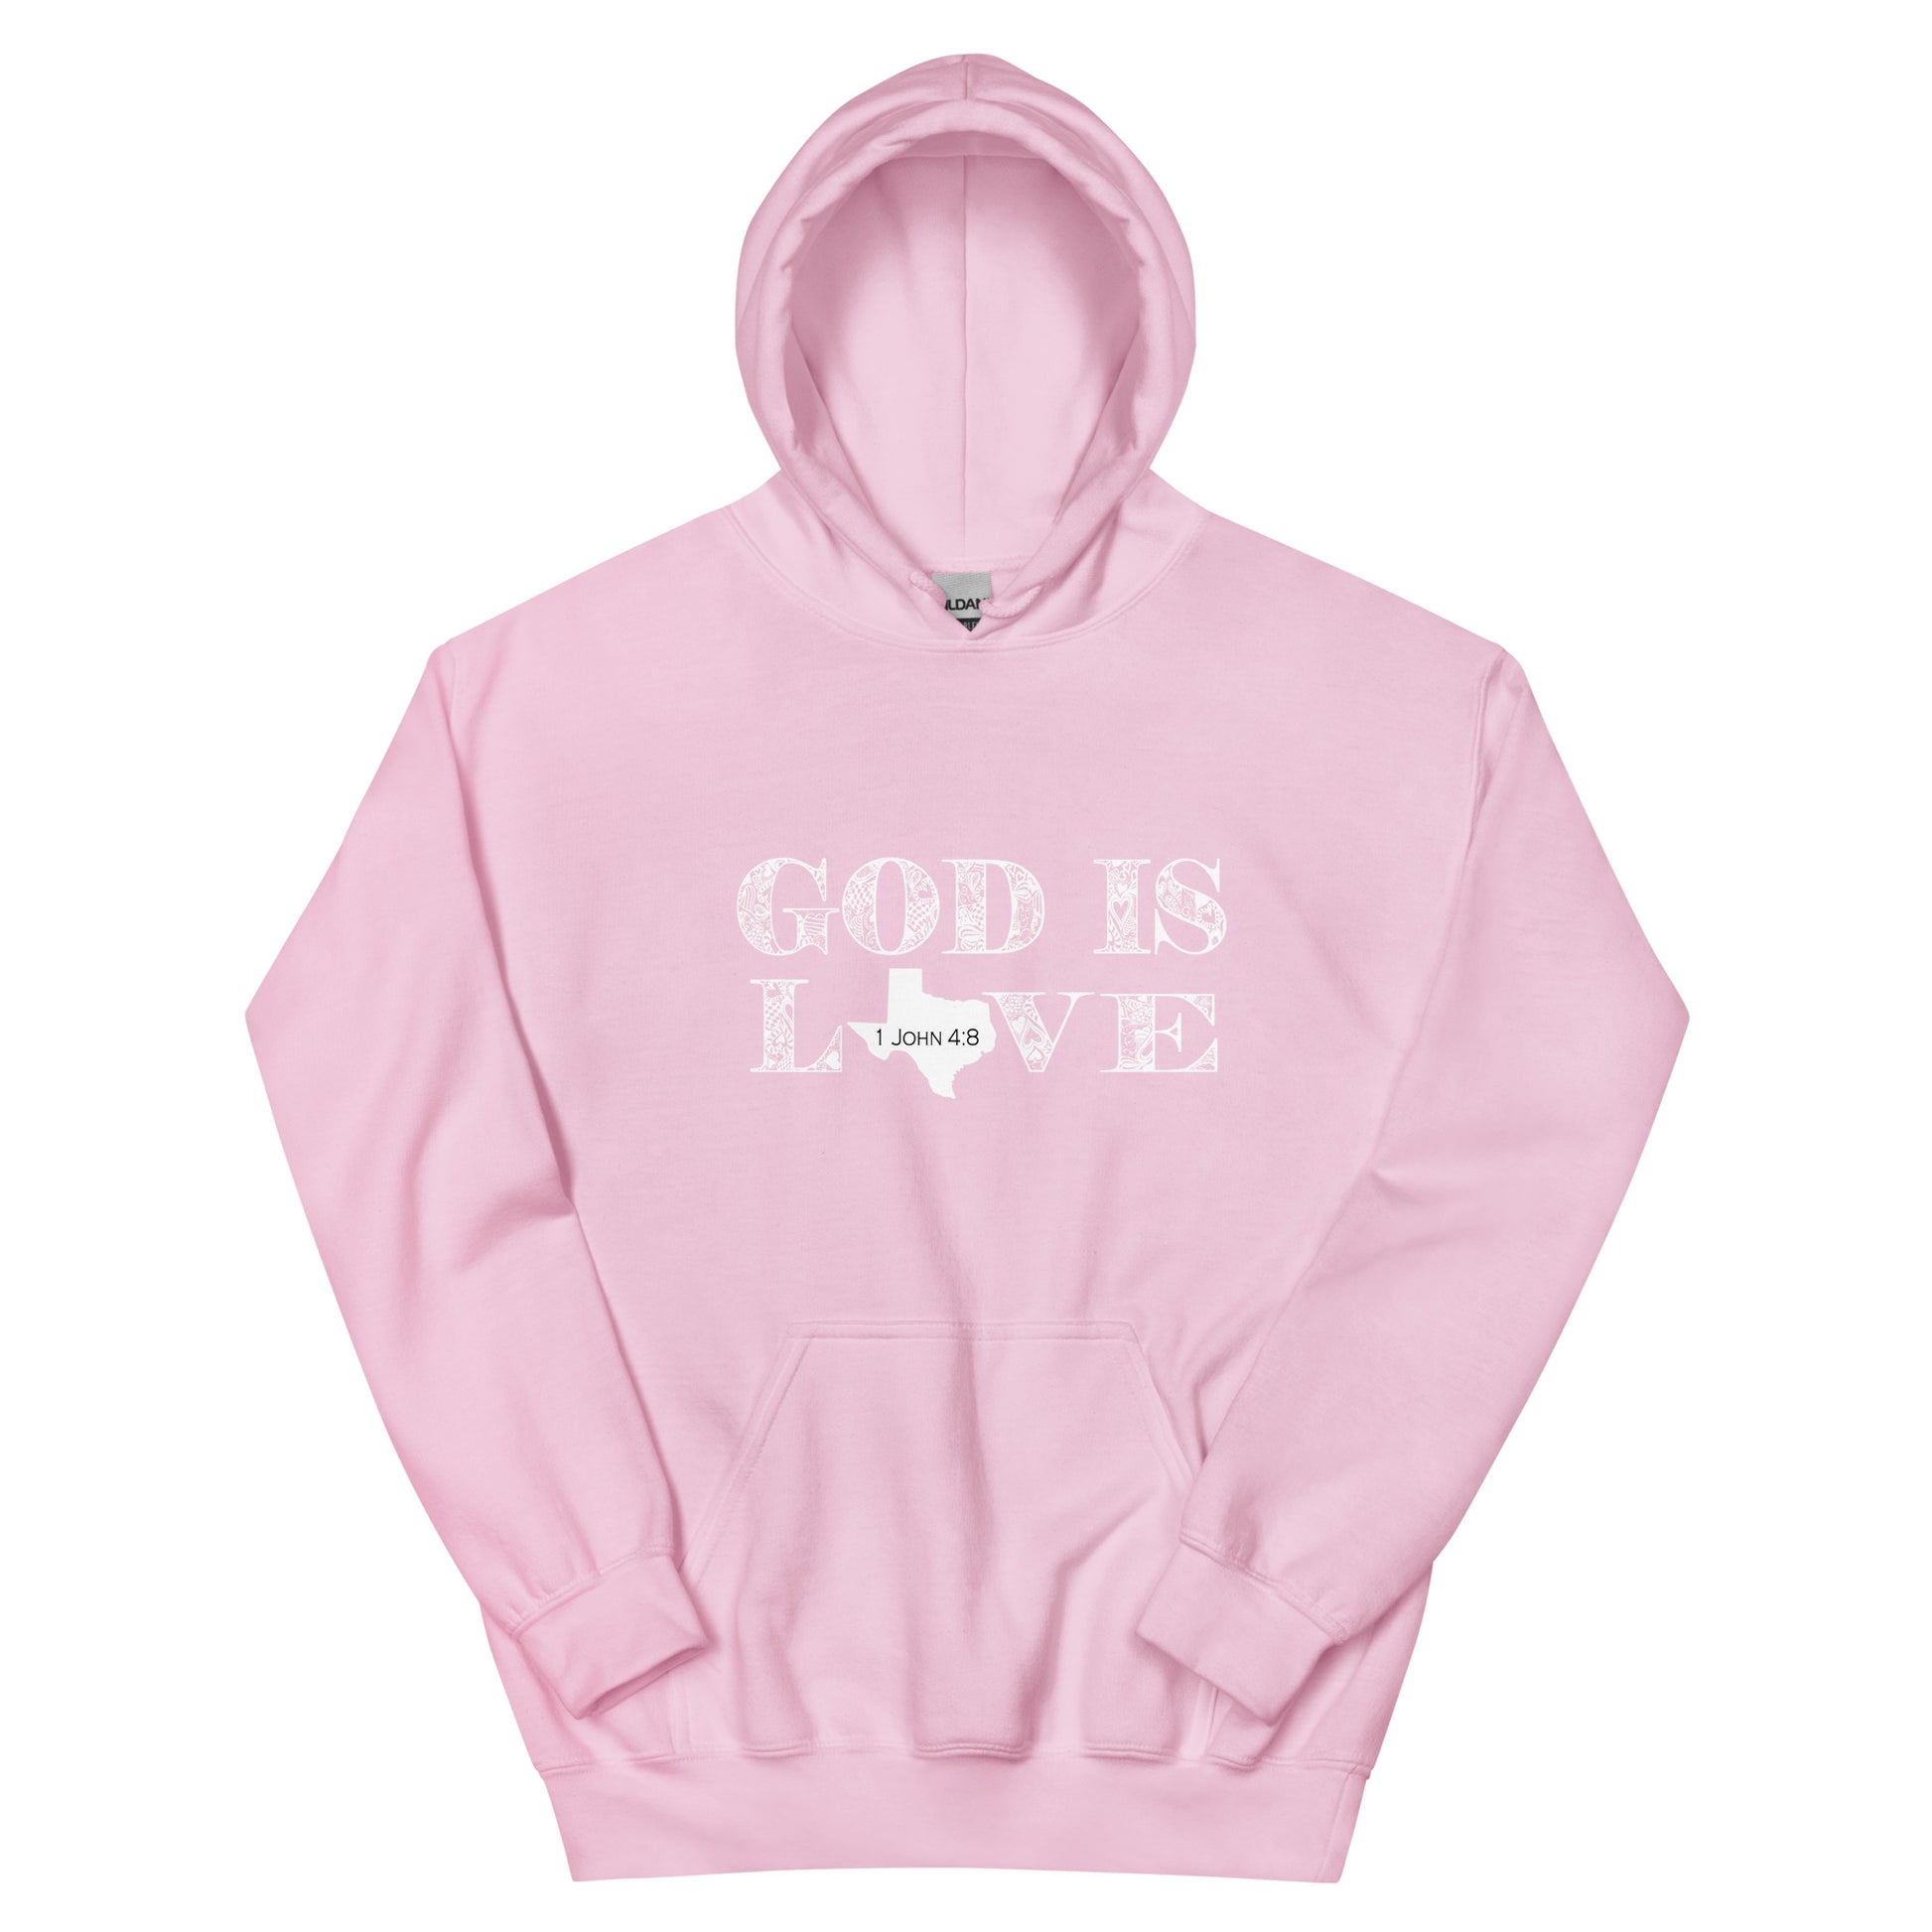 1 John 4:8 God Is Love Unisex Texas Hoodie in Light Pink - front view with hood up